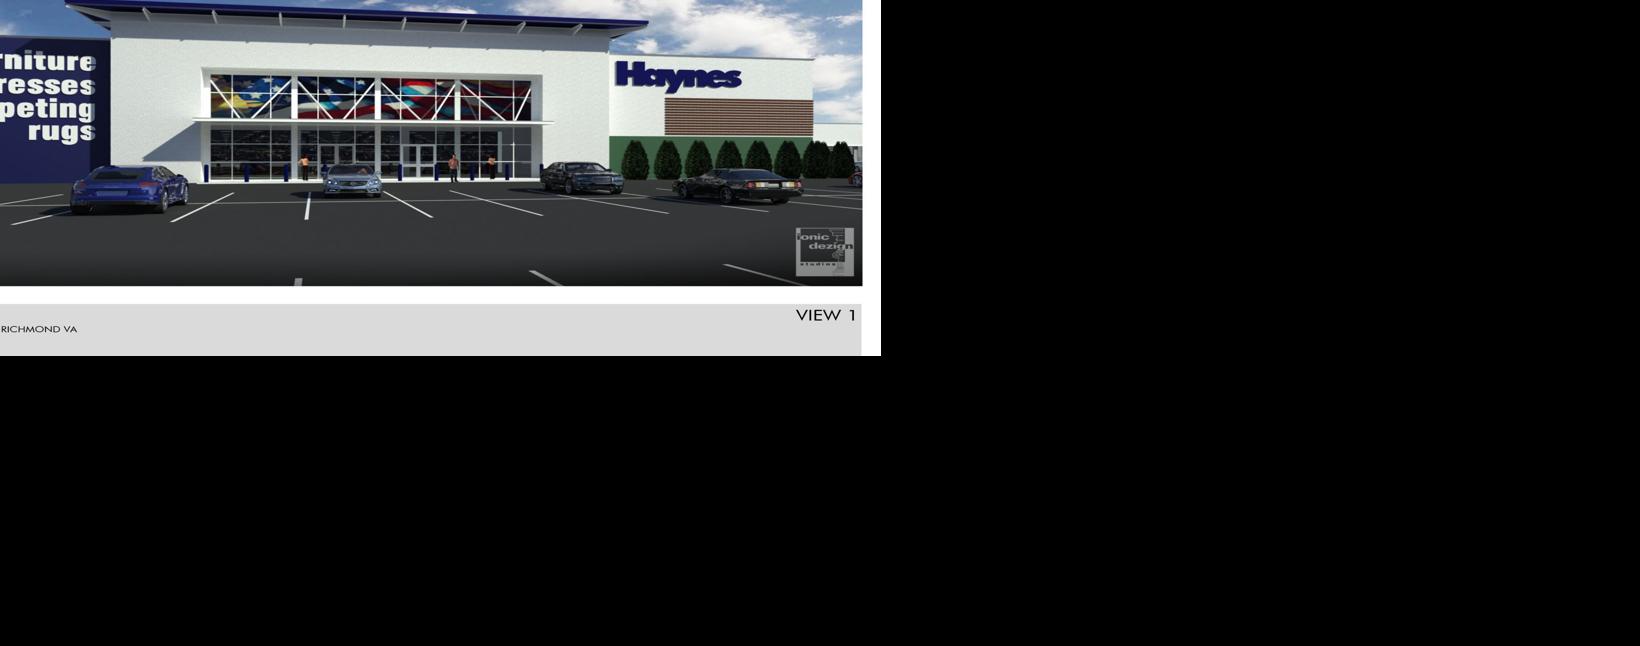 Haynes Furniture To Spend Millions Remodeling Its Two Richmond